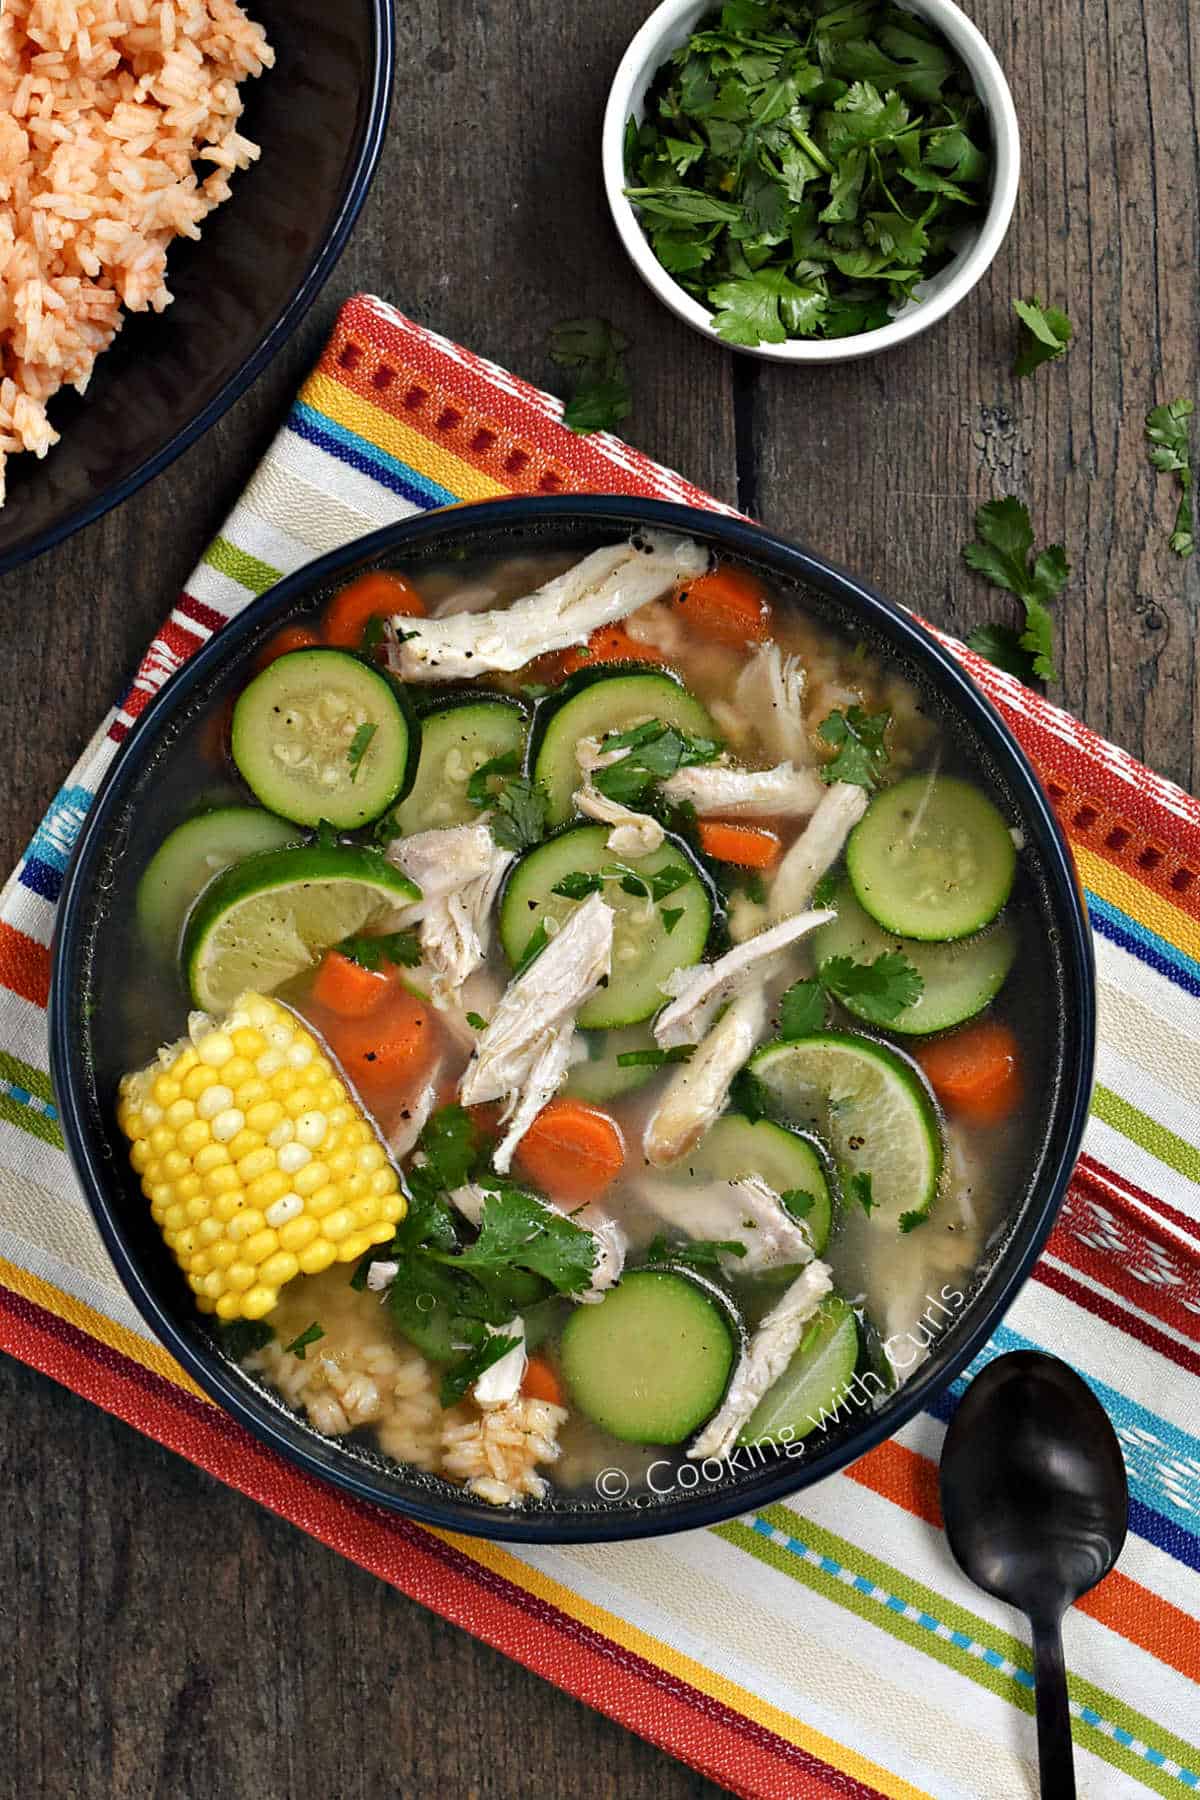 Chicken, sliced zucchini, carrots, and corn on the cob in a bowl with bowls of rice and cilantro in the background.